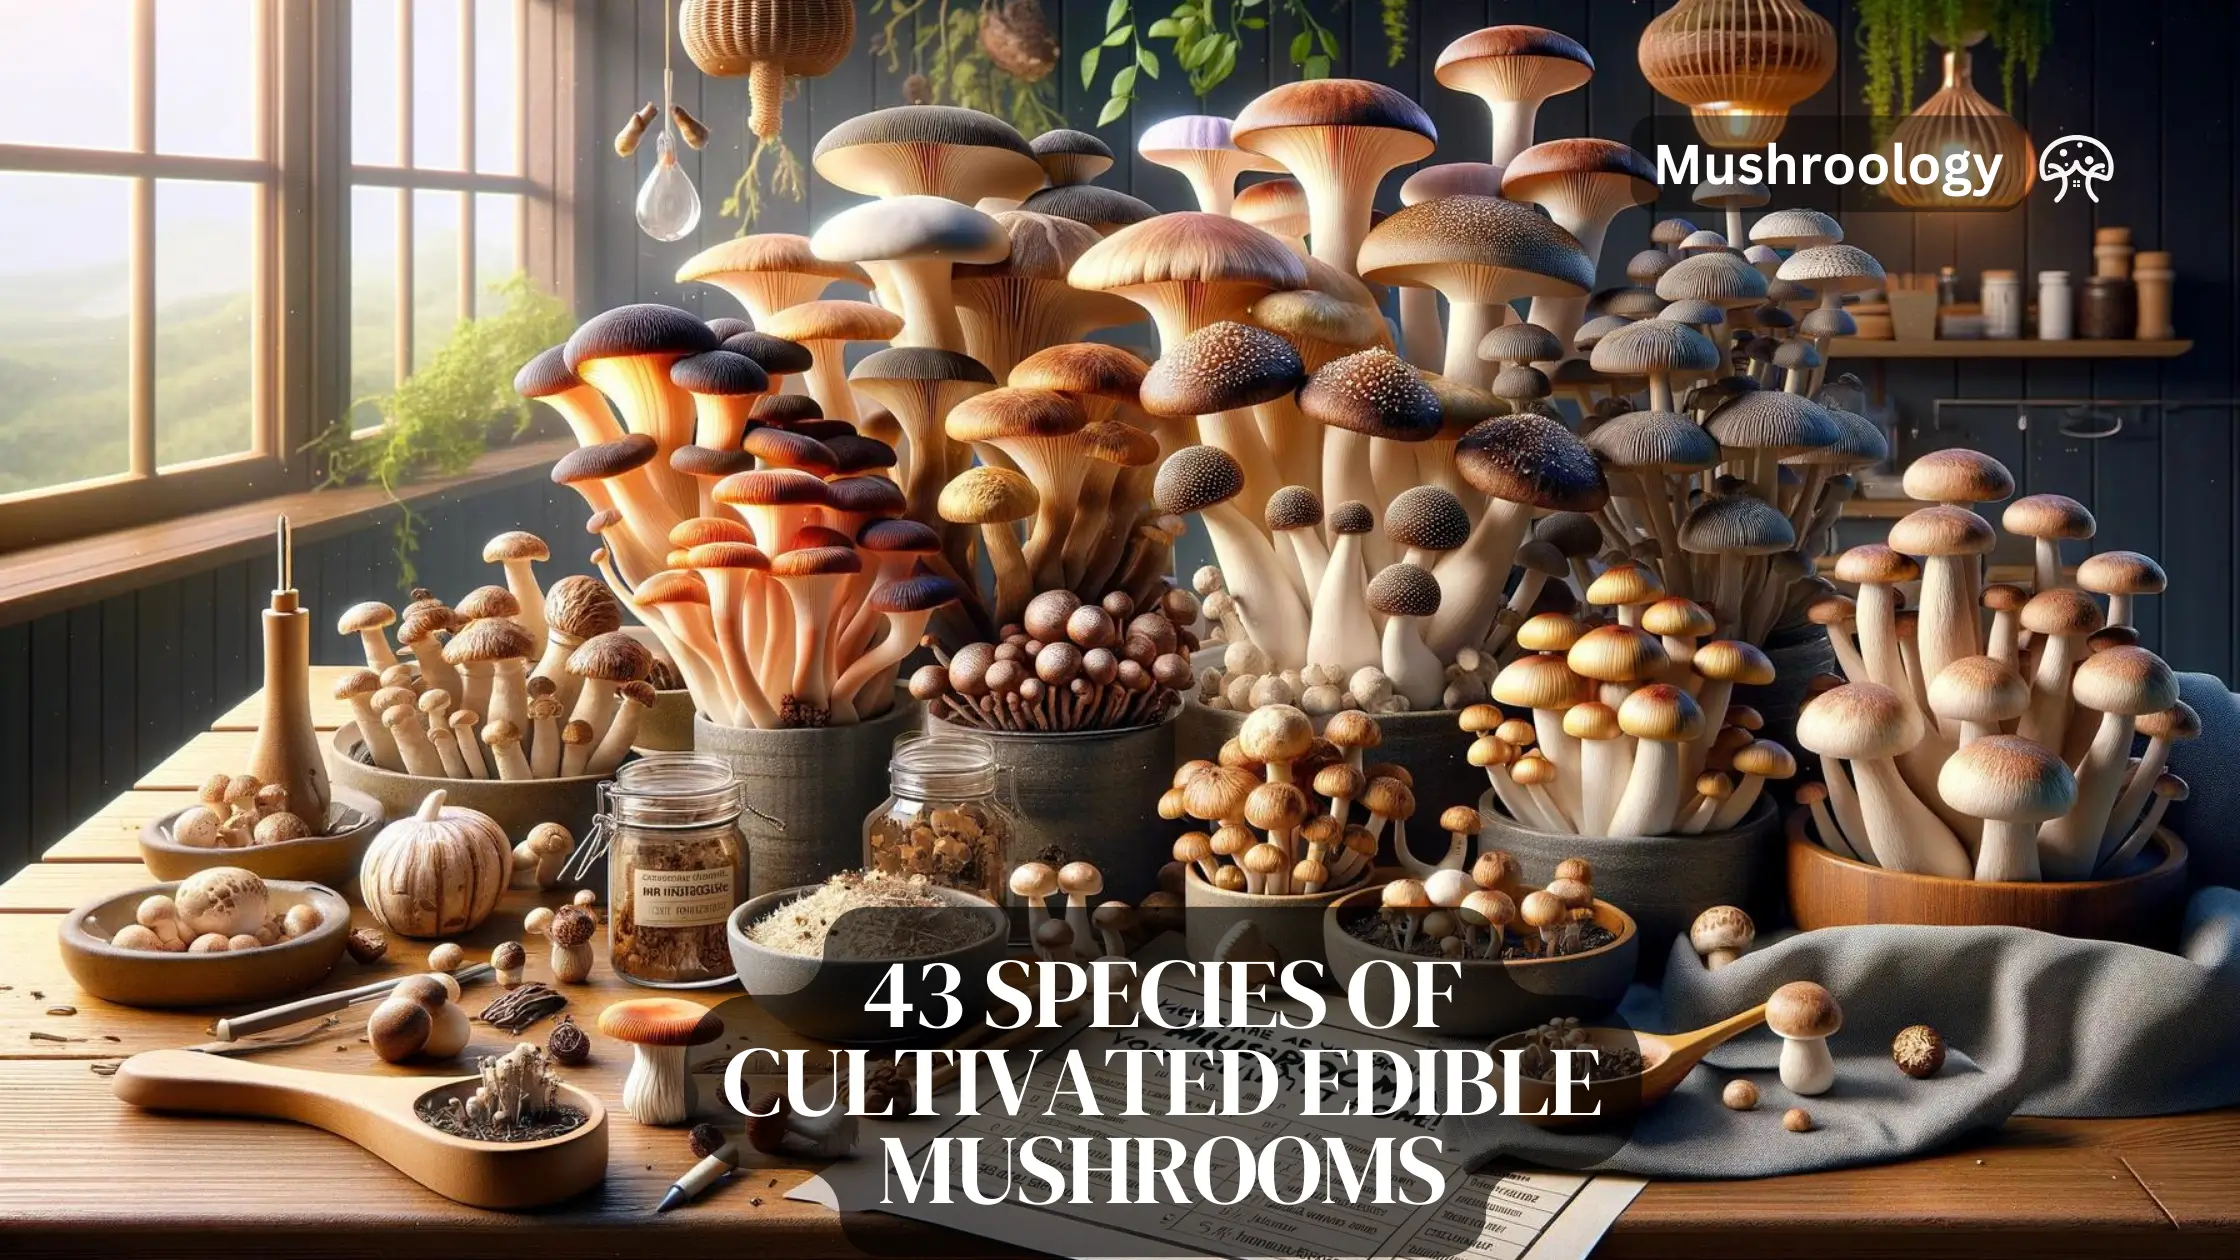 43 Species of Commercially Cultivated Edible Mushrooms